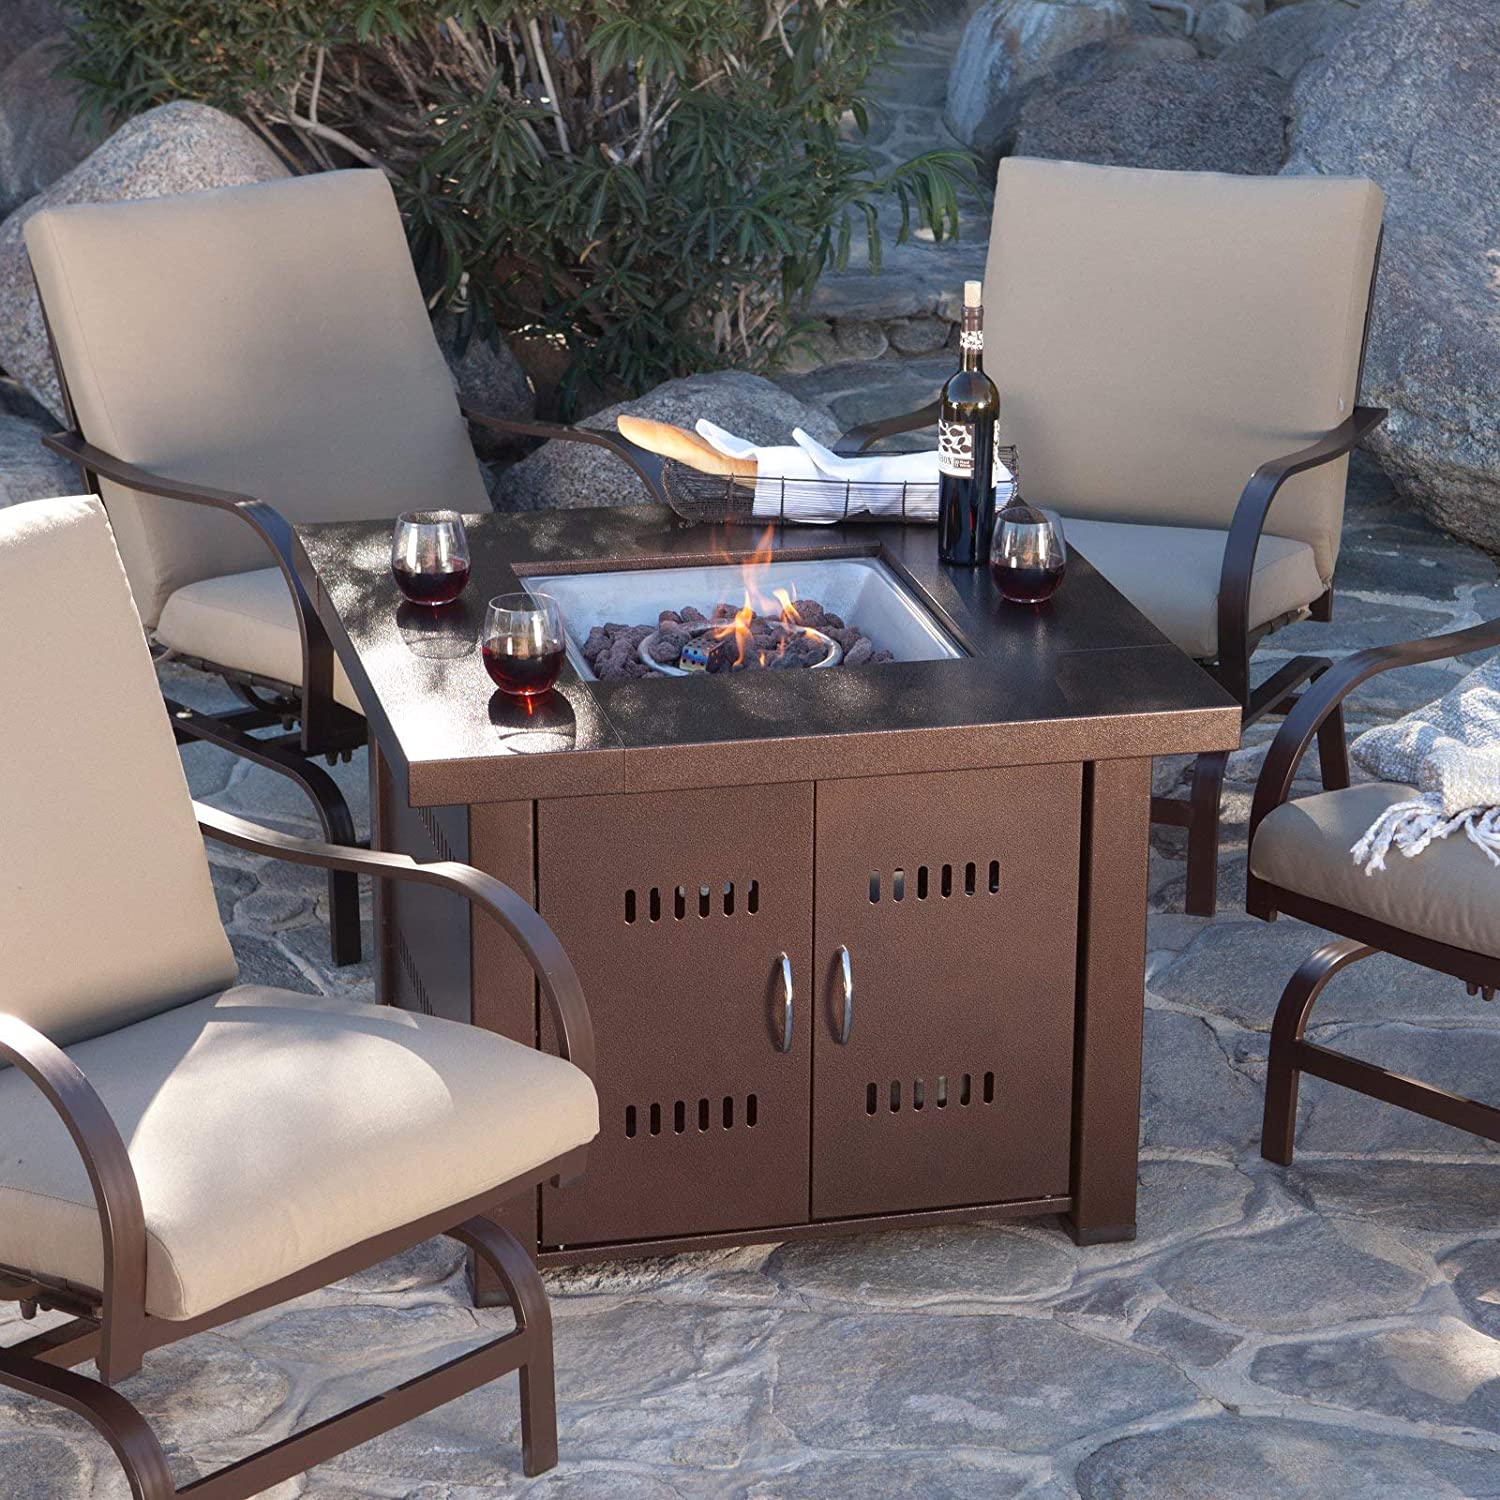 Glow Warm 14kw Outdoor Propane Gas Table Fire Pit (Bronze)